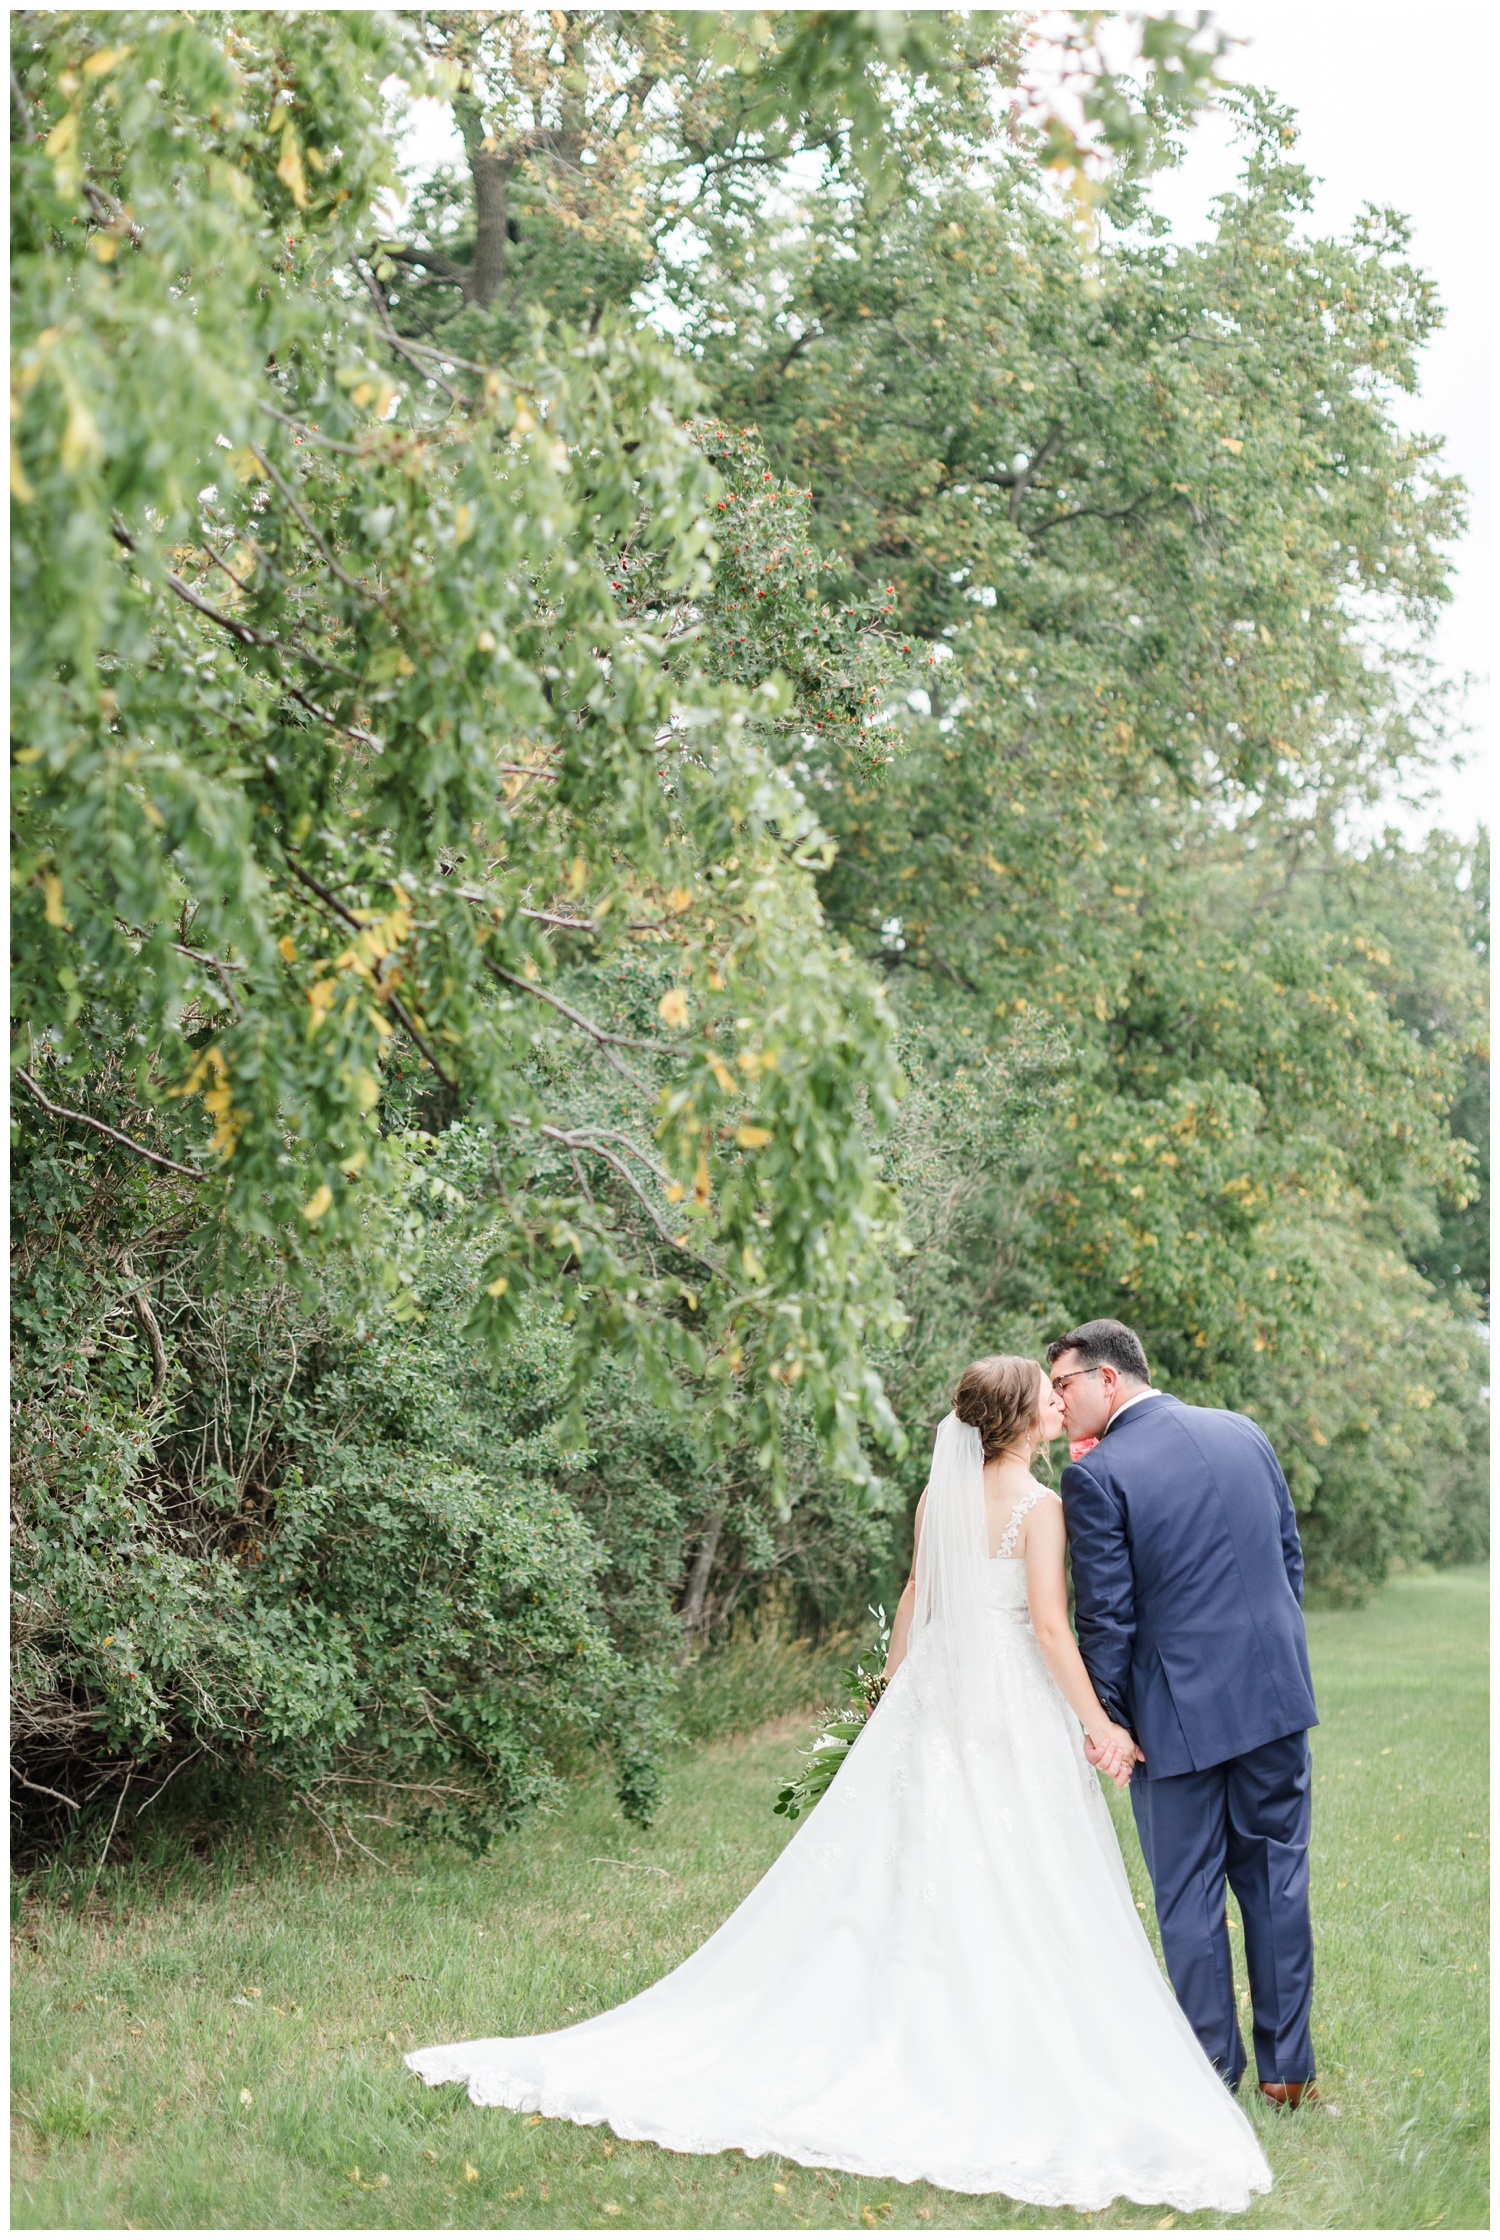 Leslie and Joe stop to share a kiss as they walk through Leslie's grandparent's farm | CB Studio